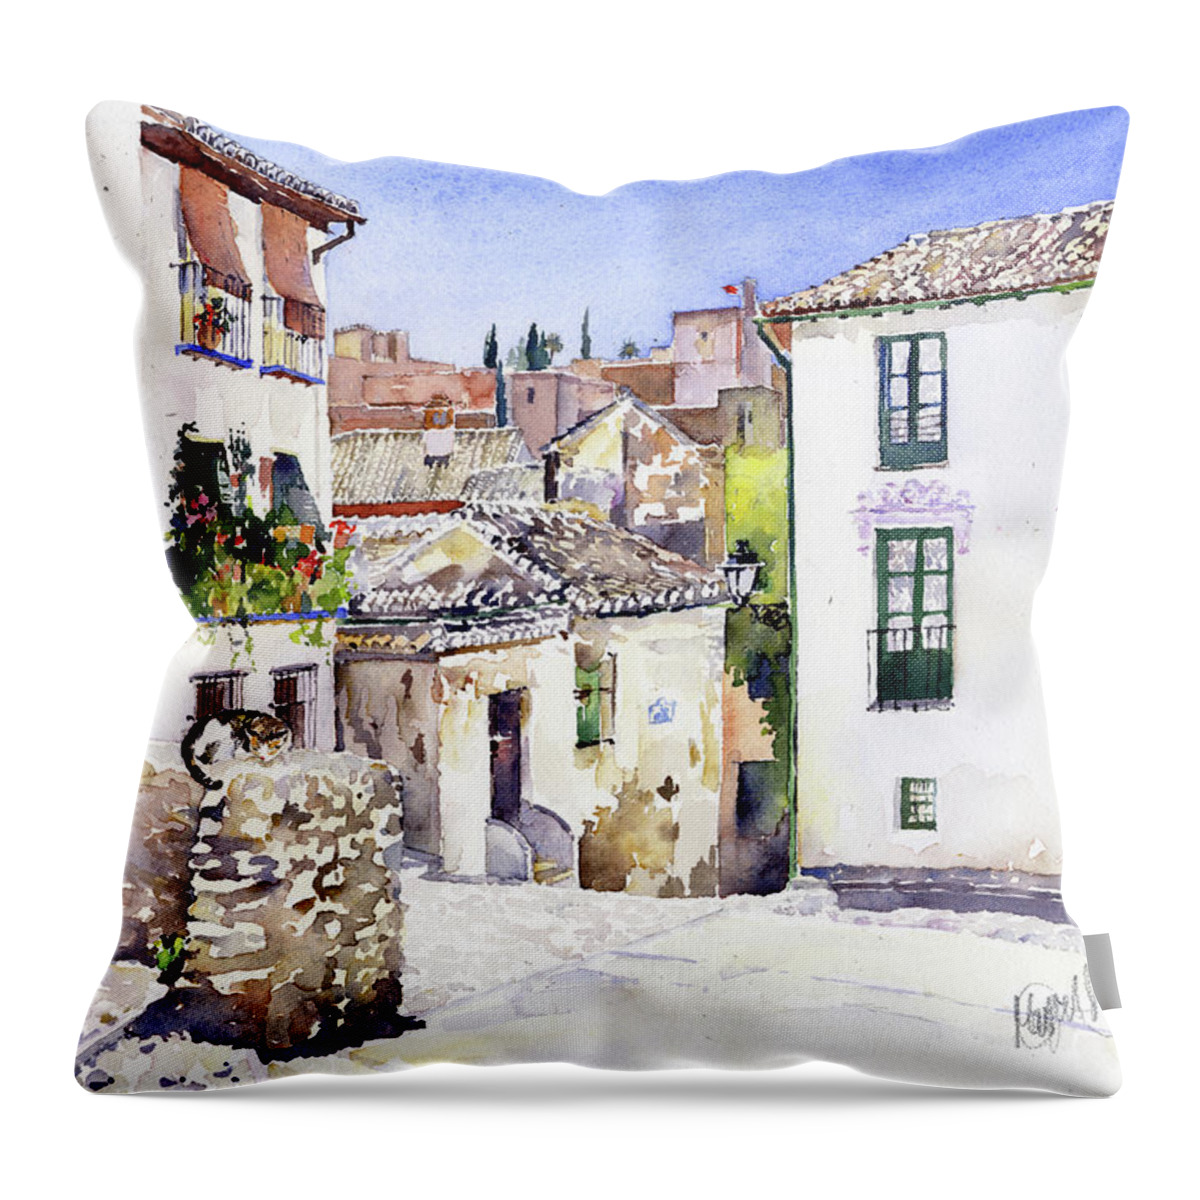 Spain Throw Pillow featuring the painting Placeta Nevot Albaicin Granada by Margaret Merry